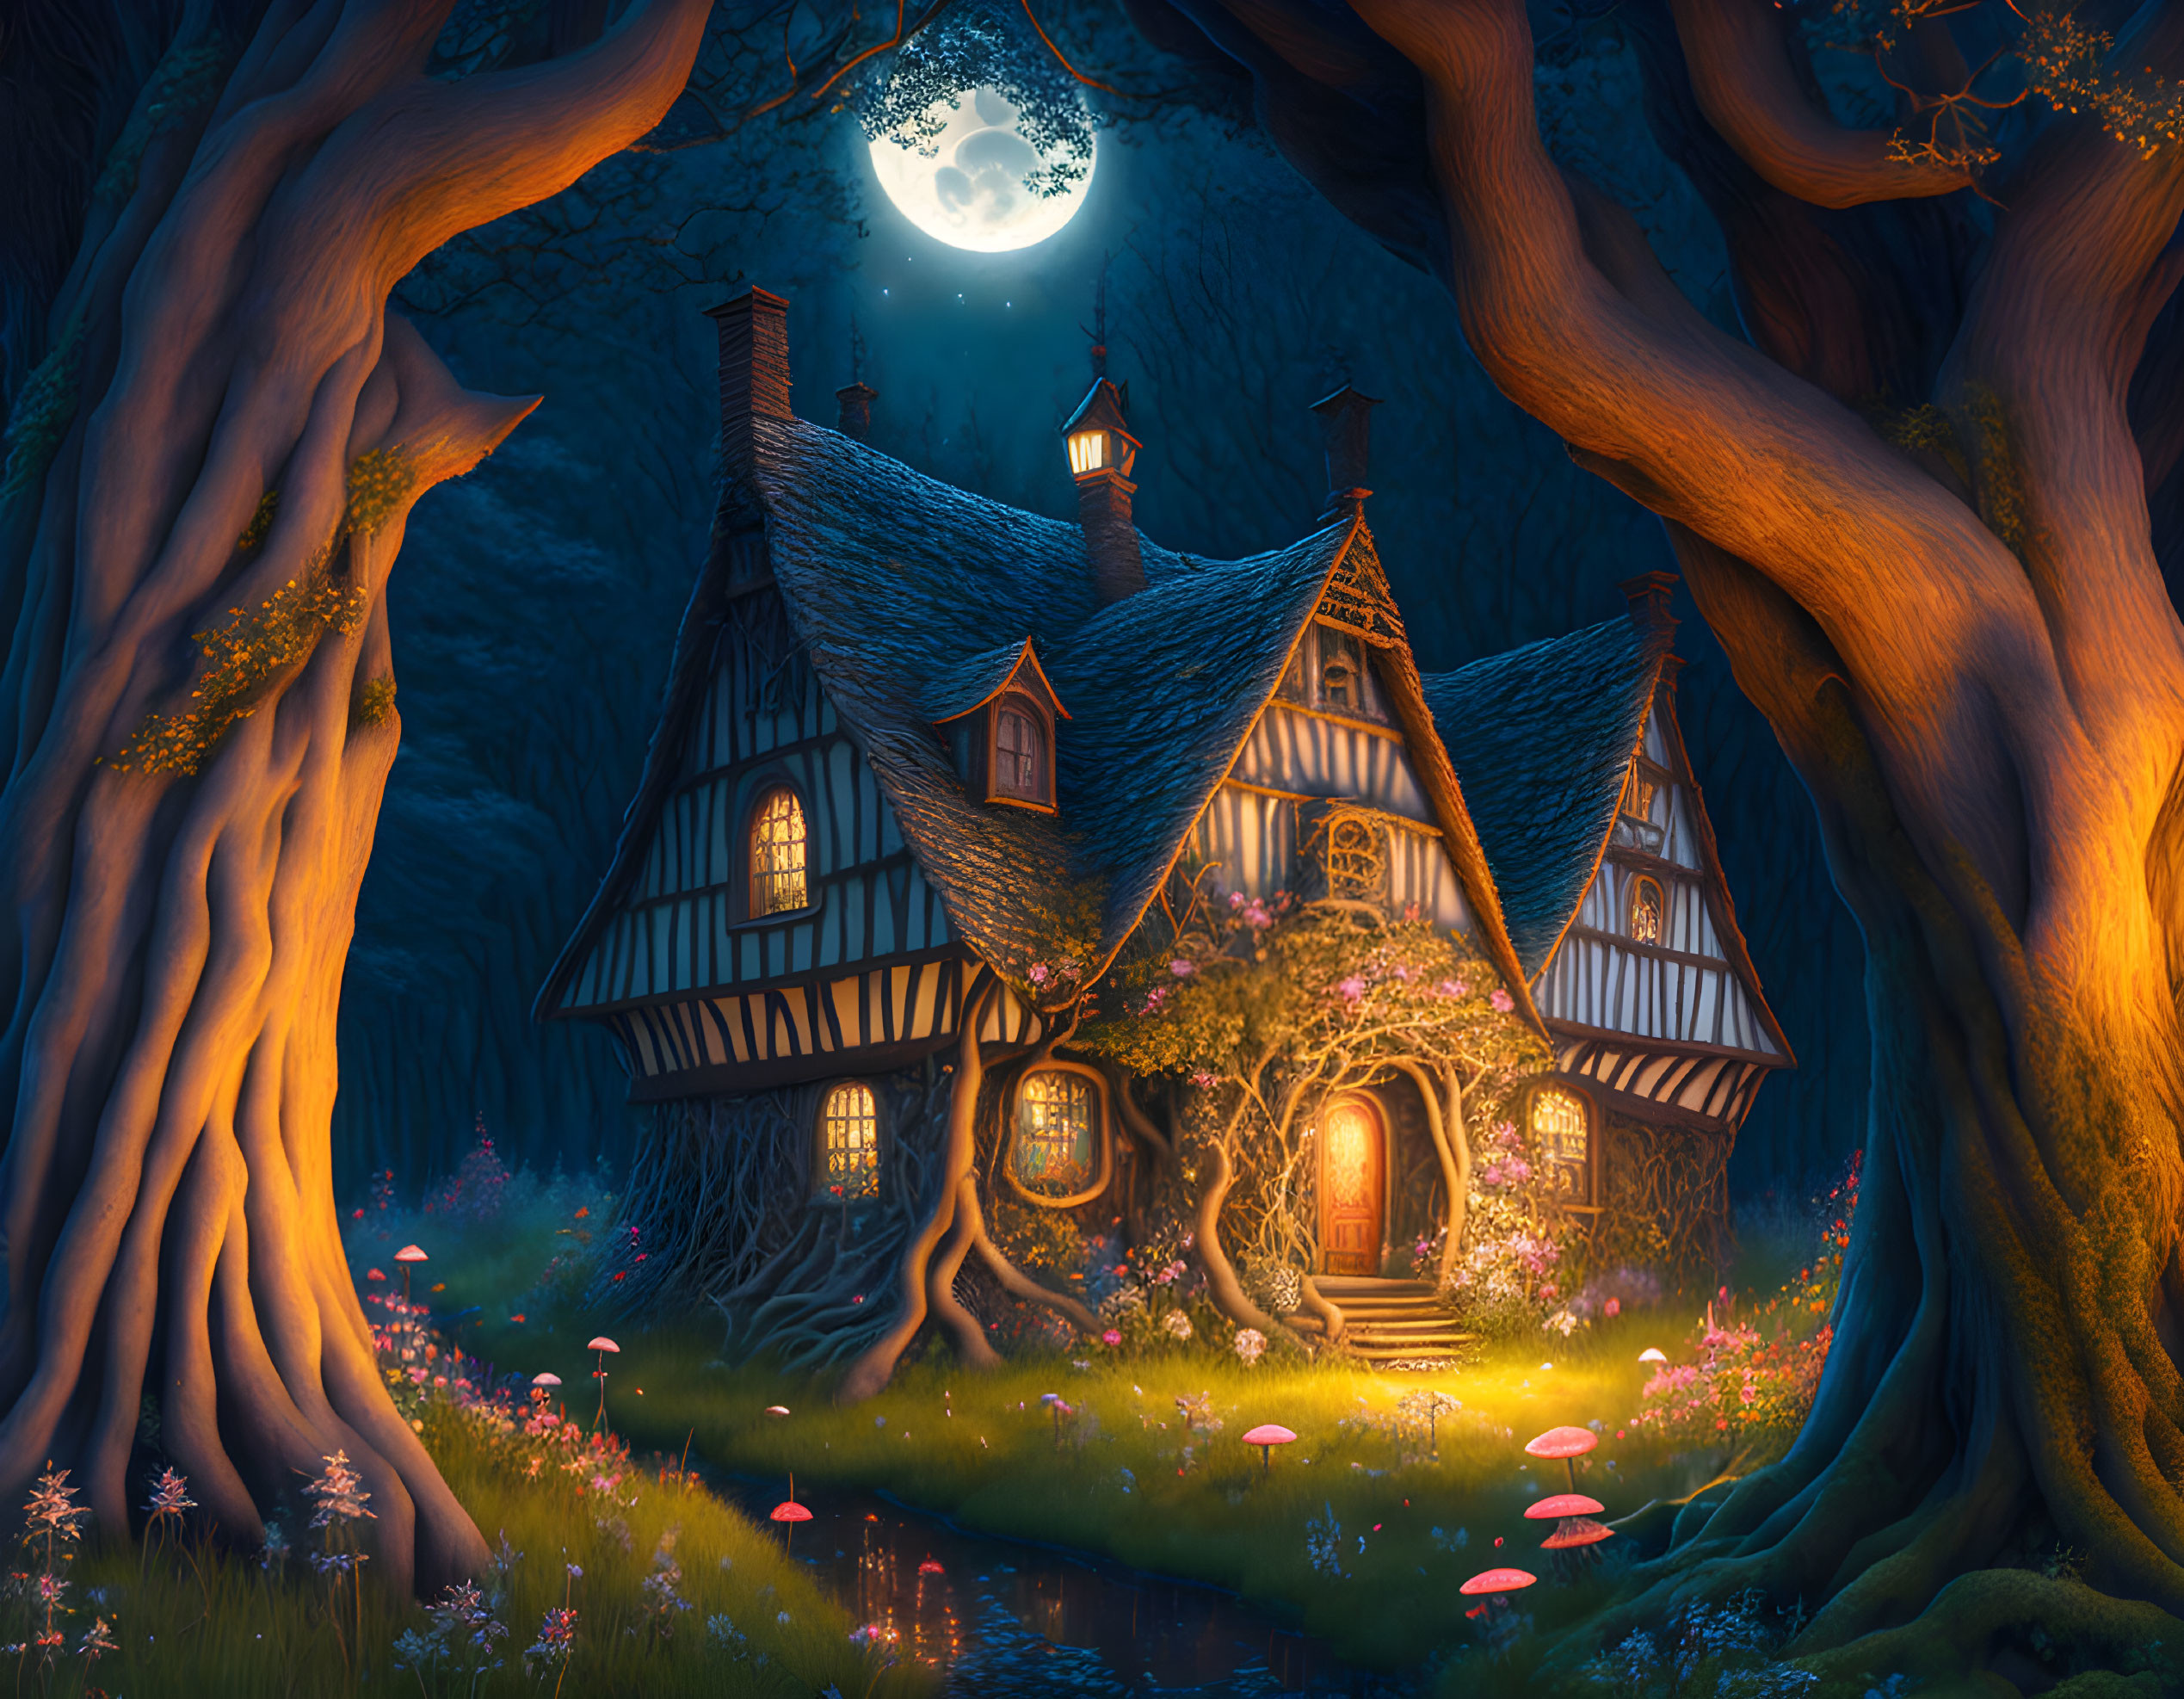 An old witch's house